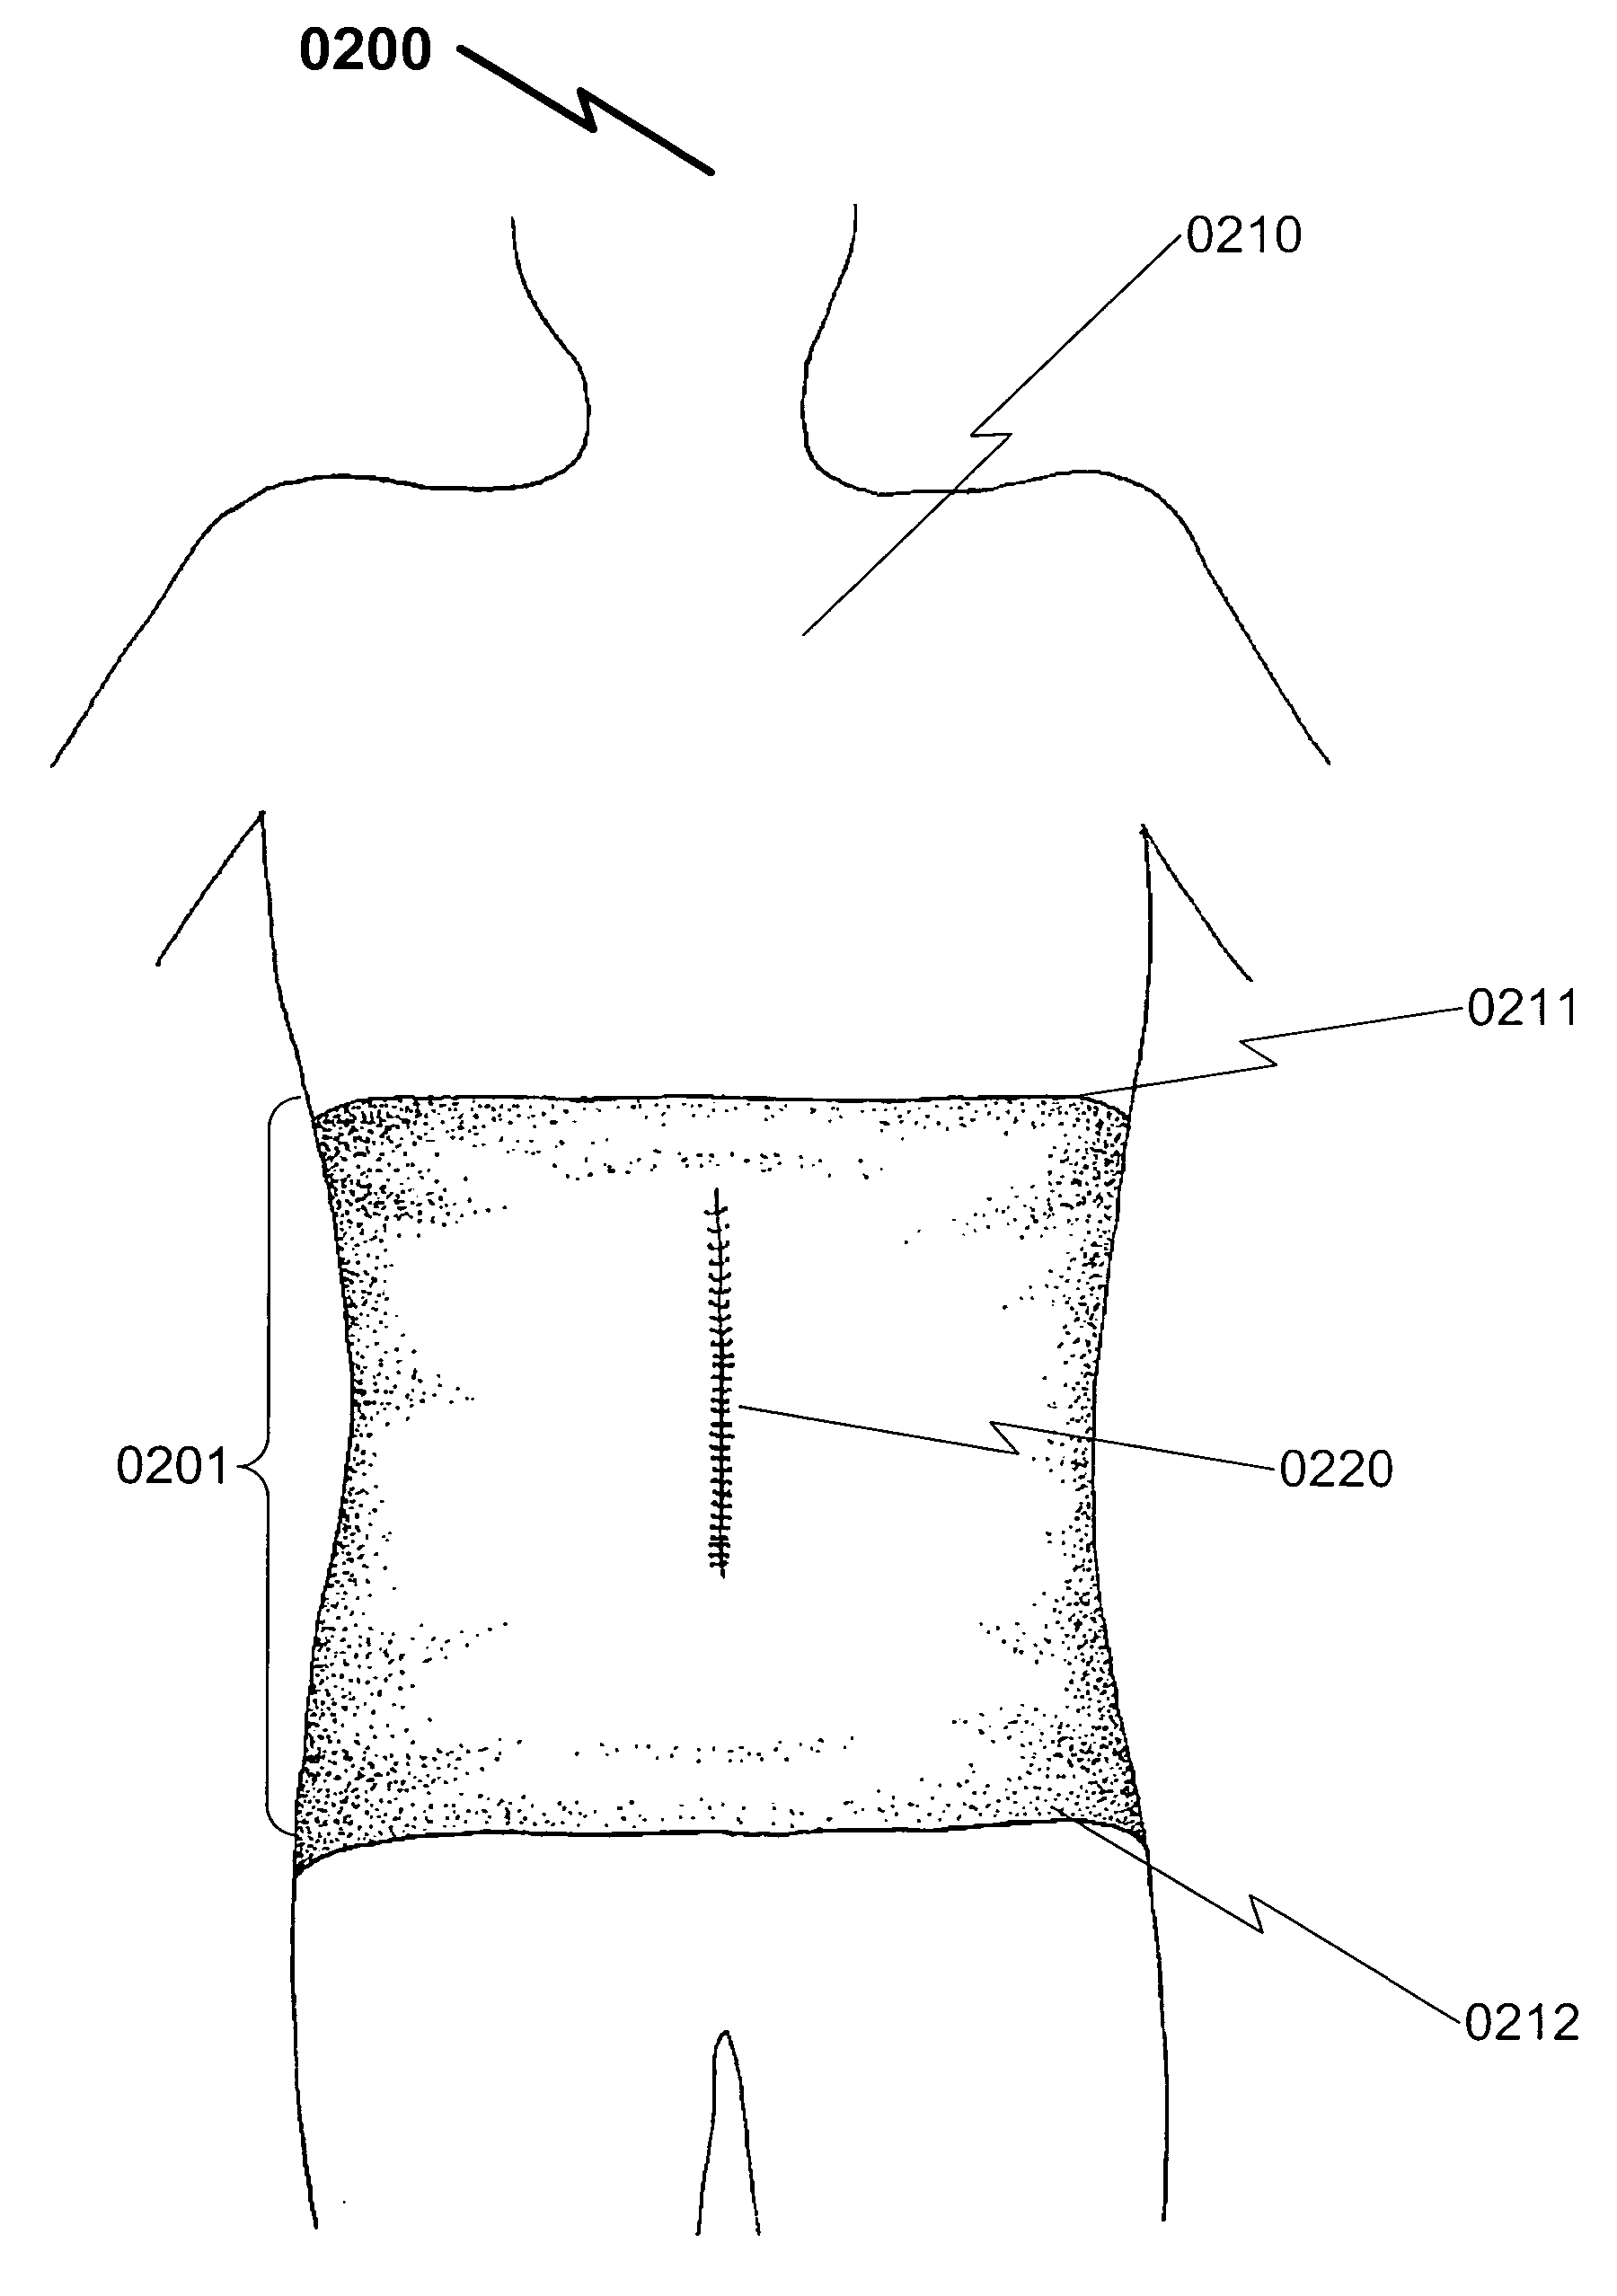 Surgical binder undergarment system and method